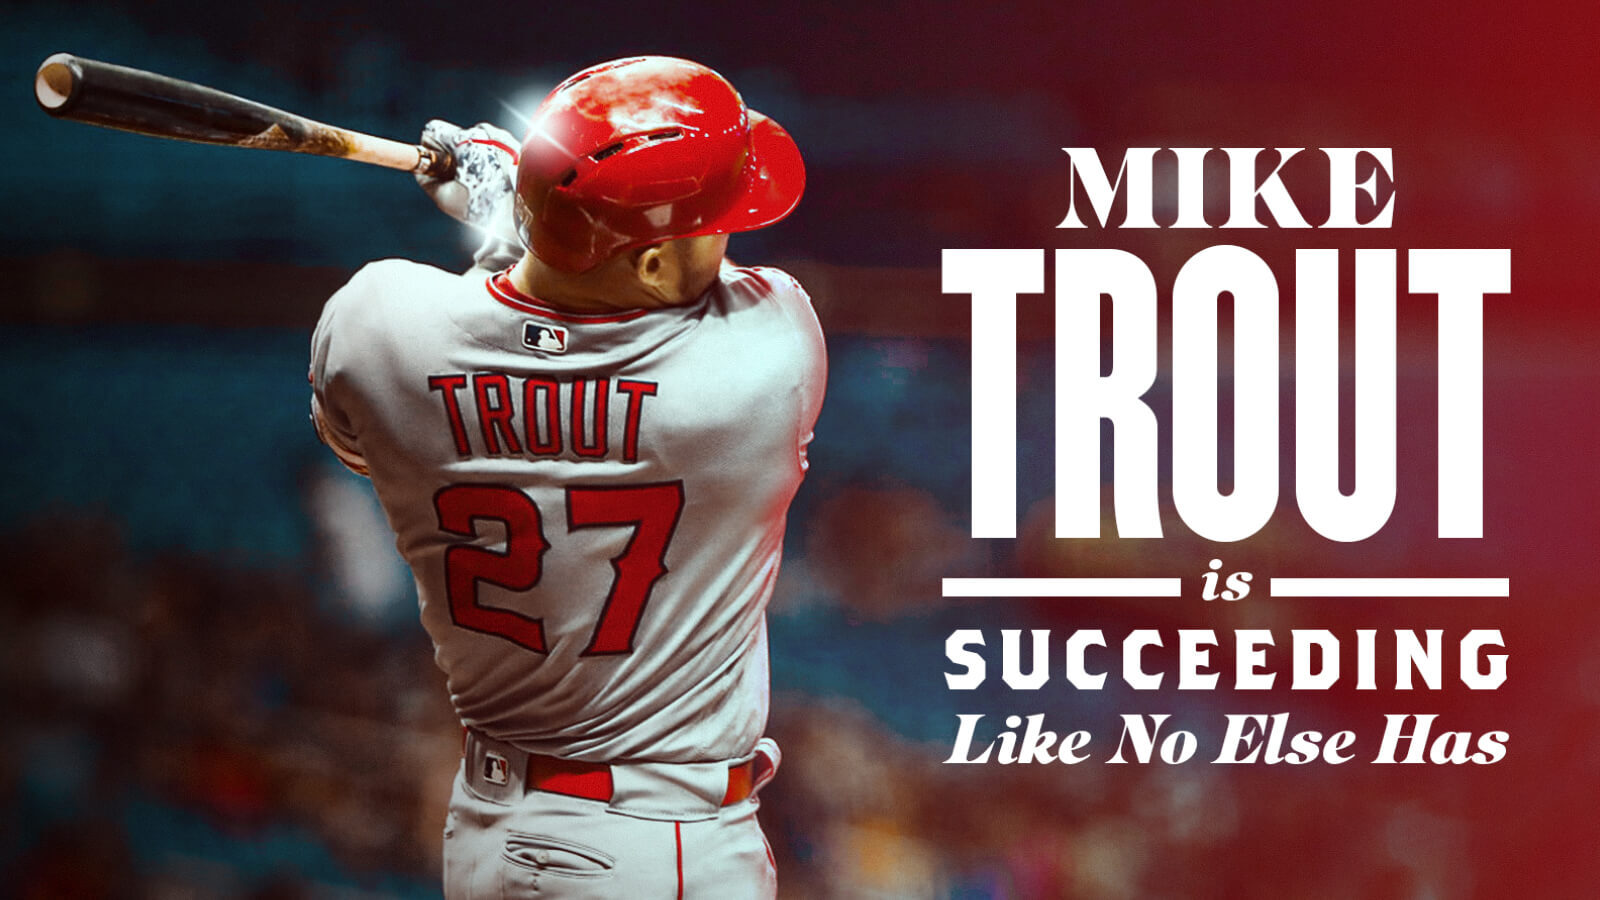 Mike trout  Baseball wallpaper, Mike trout, Best baseball player